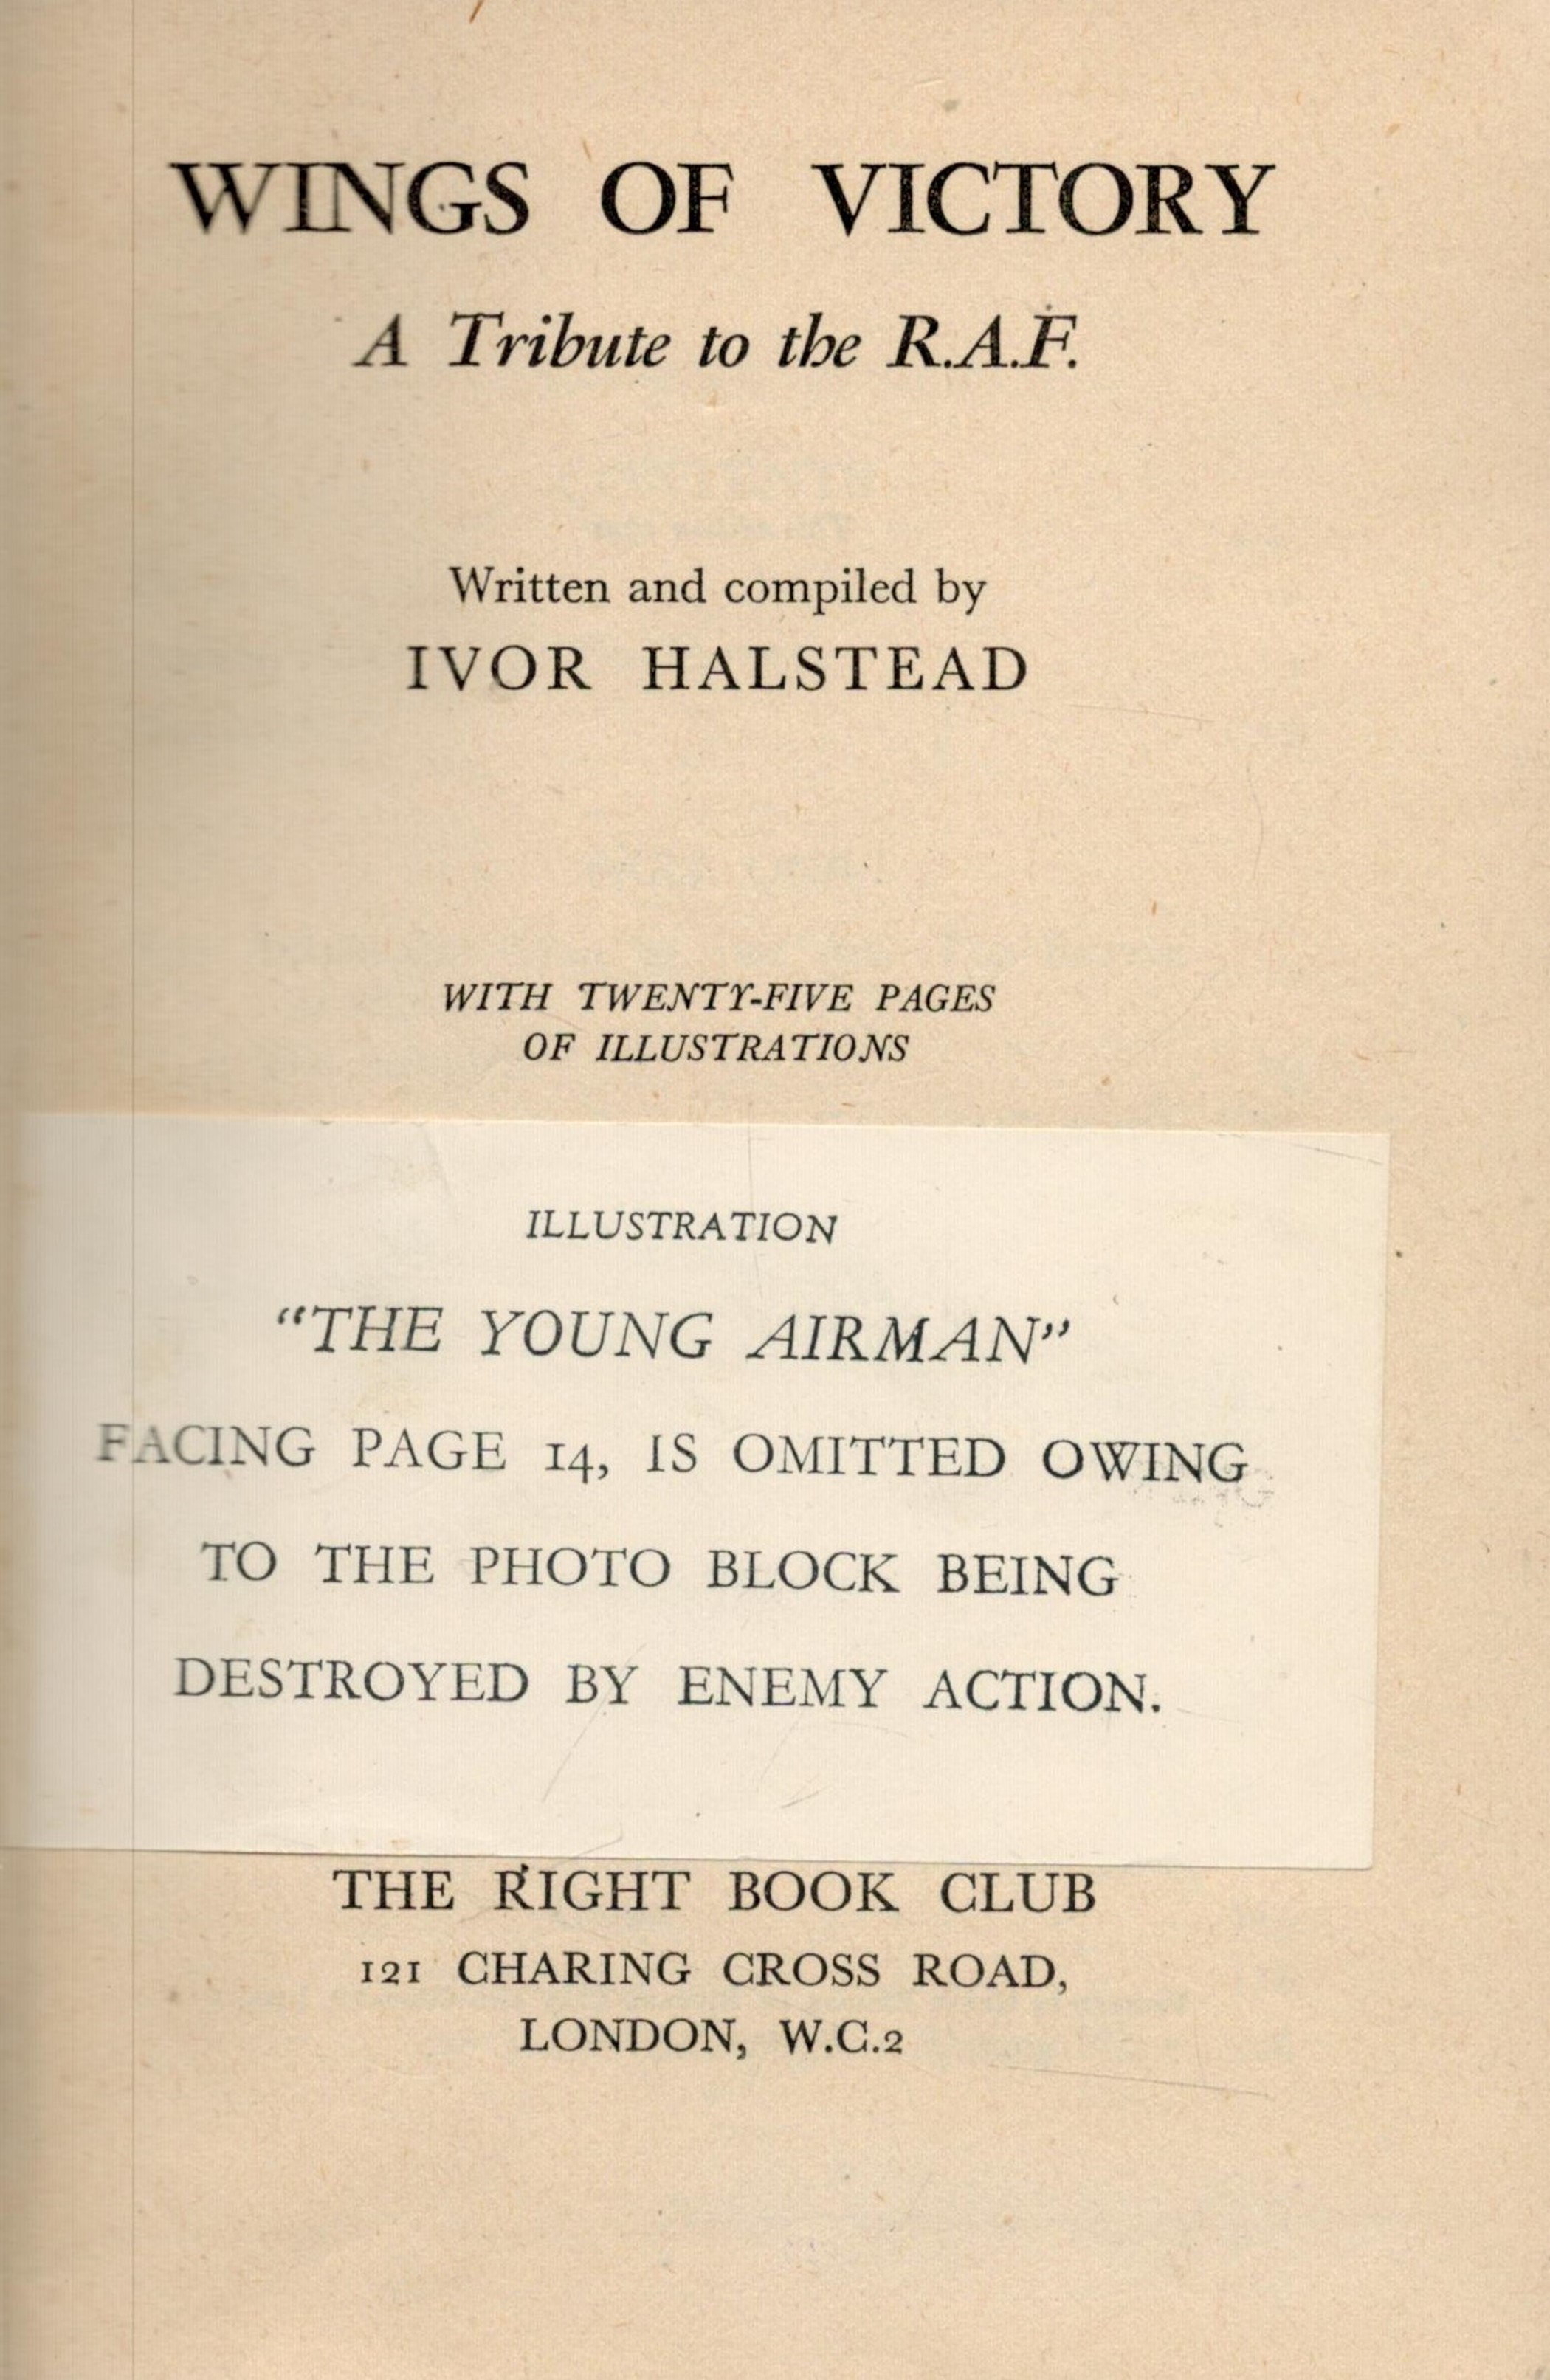 Wings of Victory A Tribute to the R. A. F. by Ivor Halstead 1941 edition unknown Hardback Book - Image 2 of 3